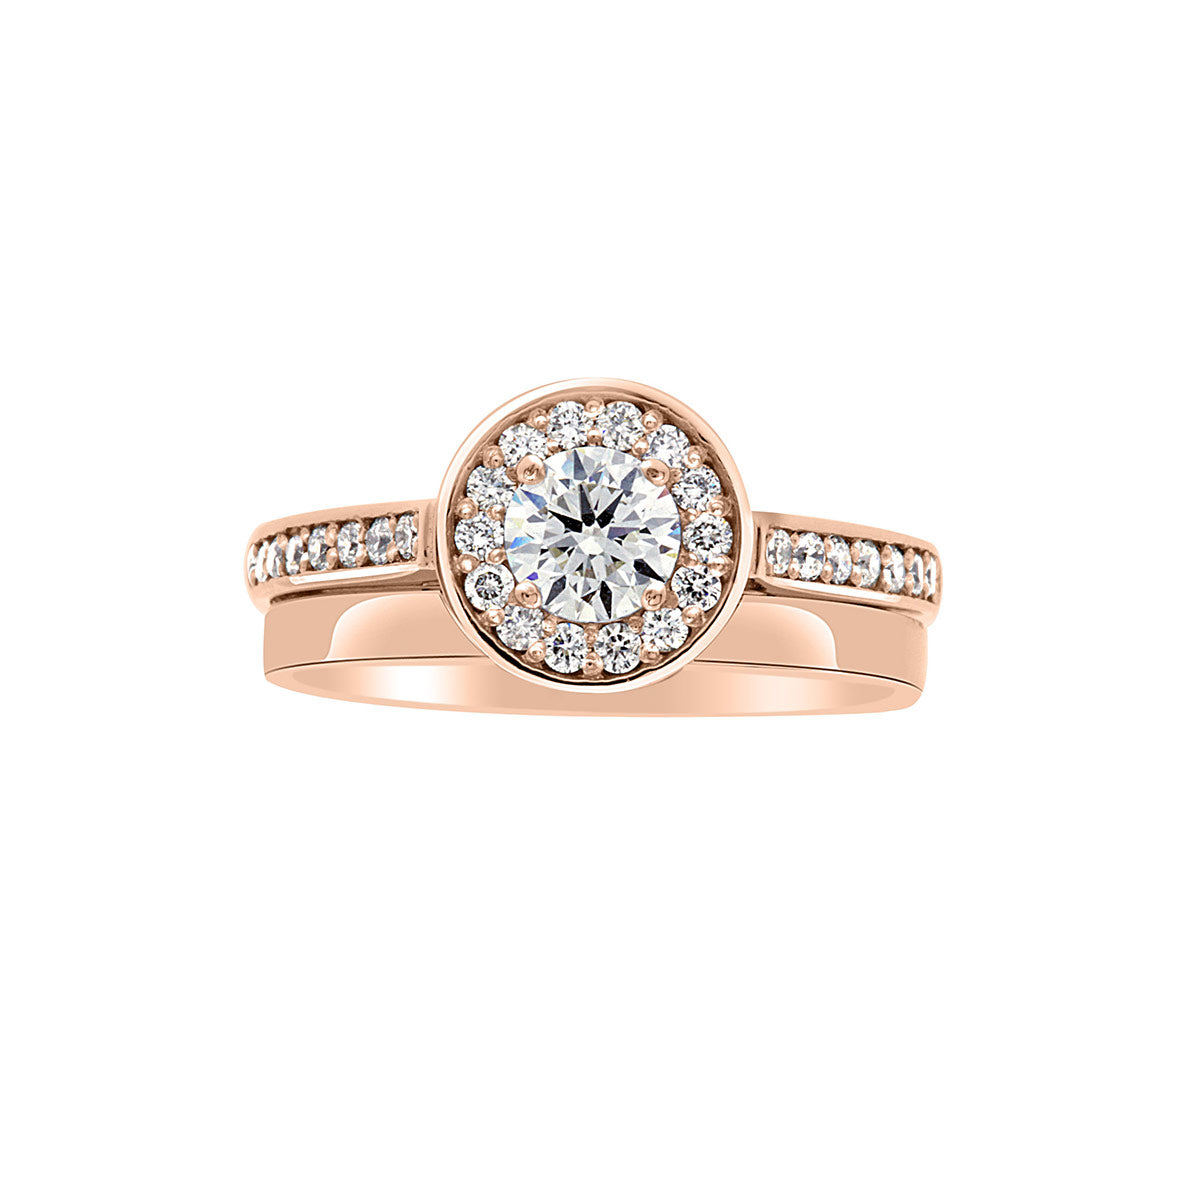 Round Halo Engagement Ring in rose gold with a matching plain wedding band